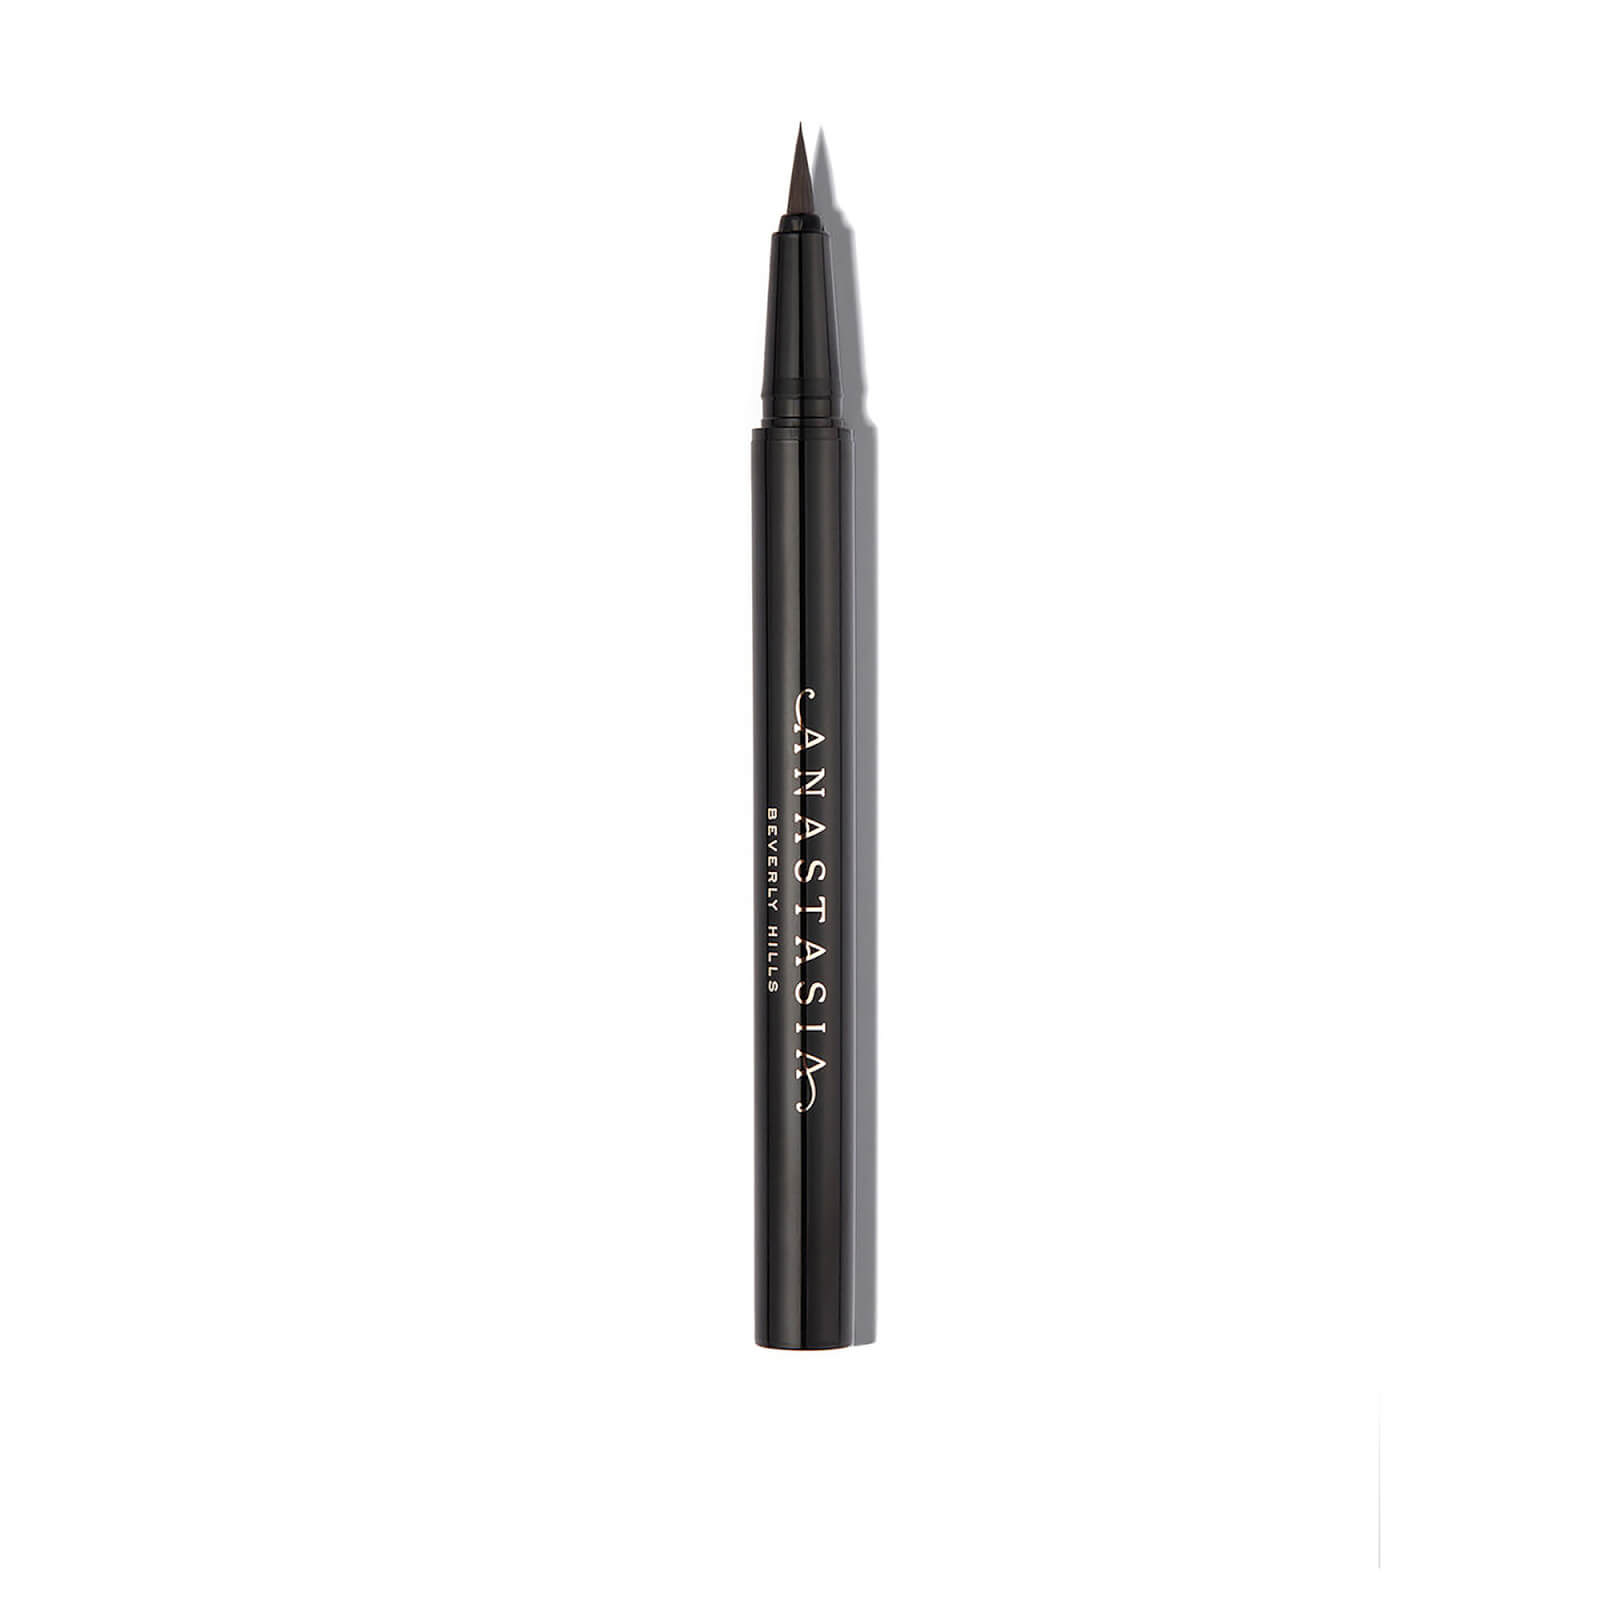 Anastasia Beverly Hills Brow Pen 0.5ml (Various Shades) - Soft Brown